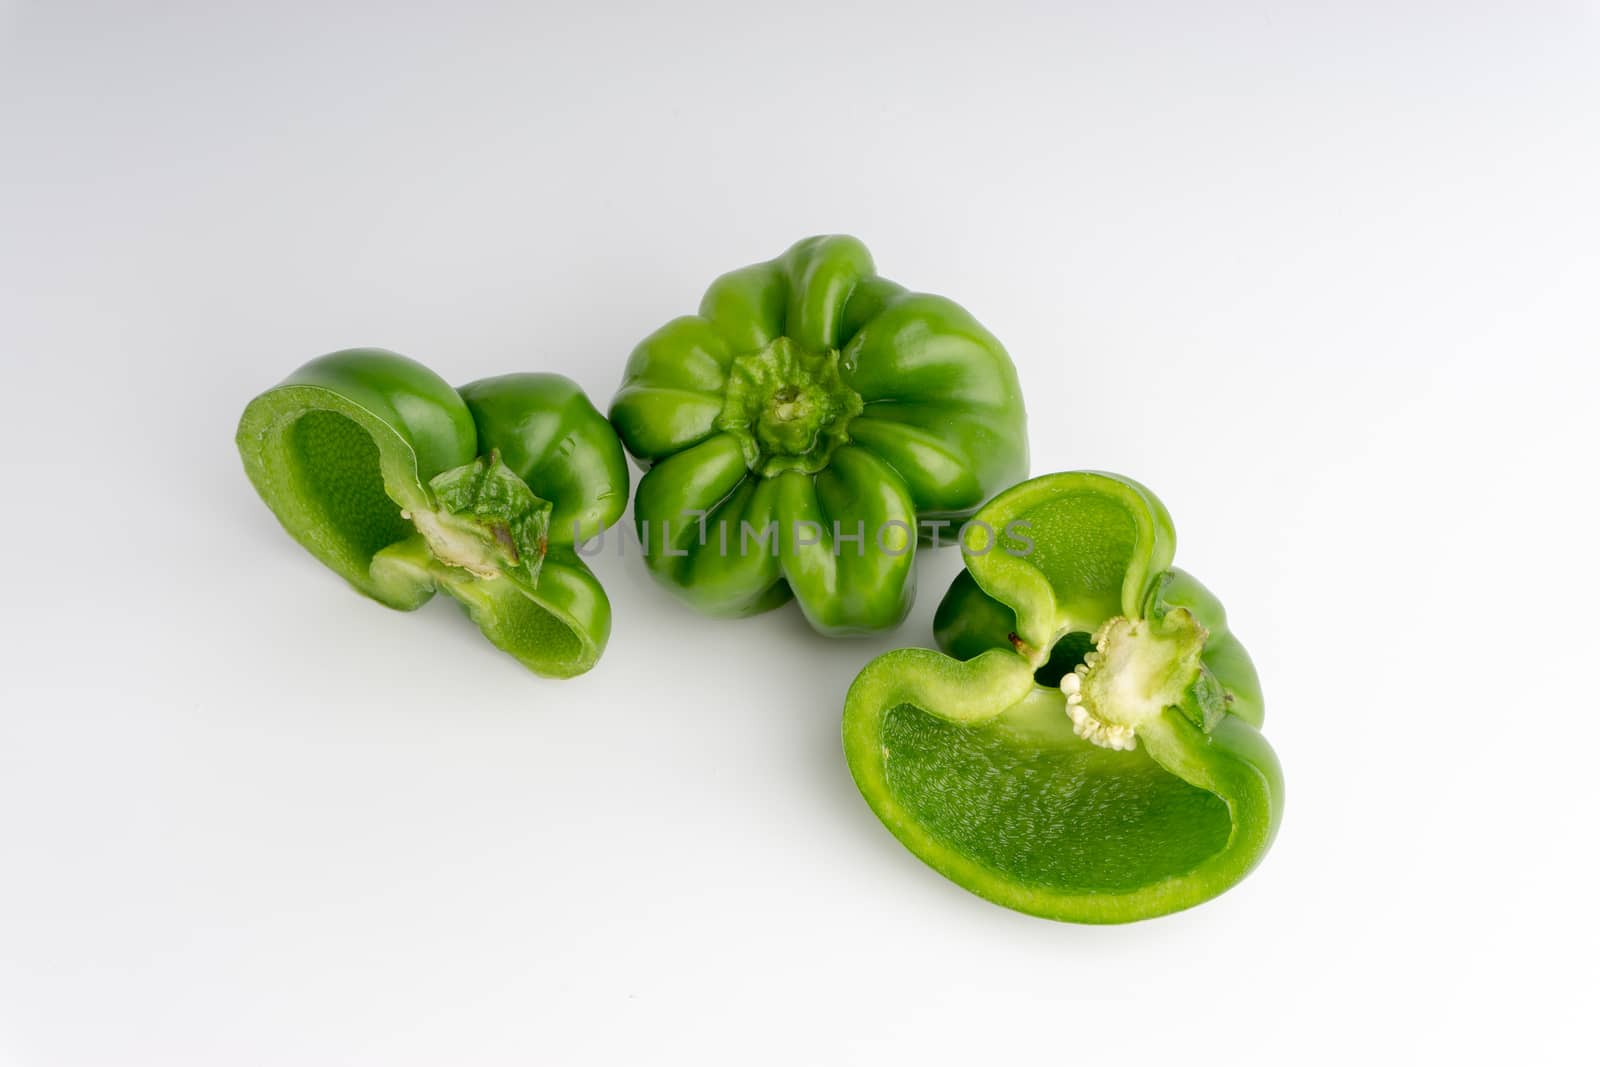 Fresh green bell peppers (capsicum) on a white background by silverwings